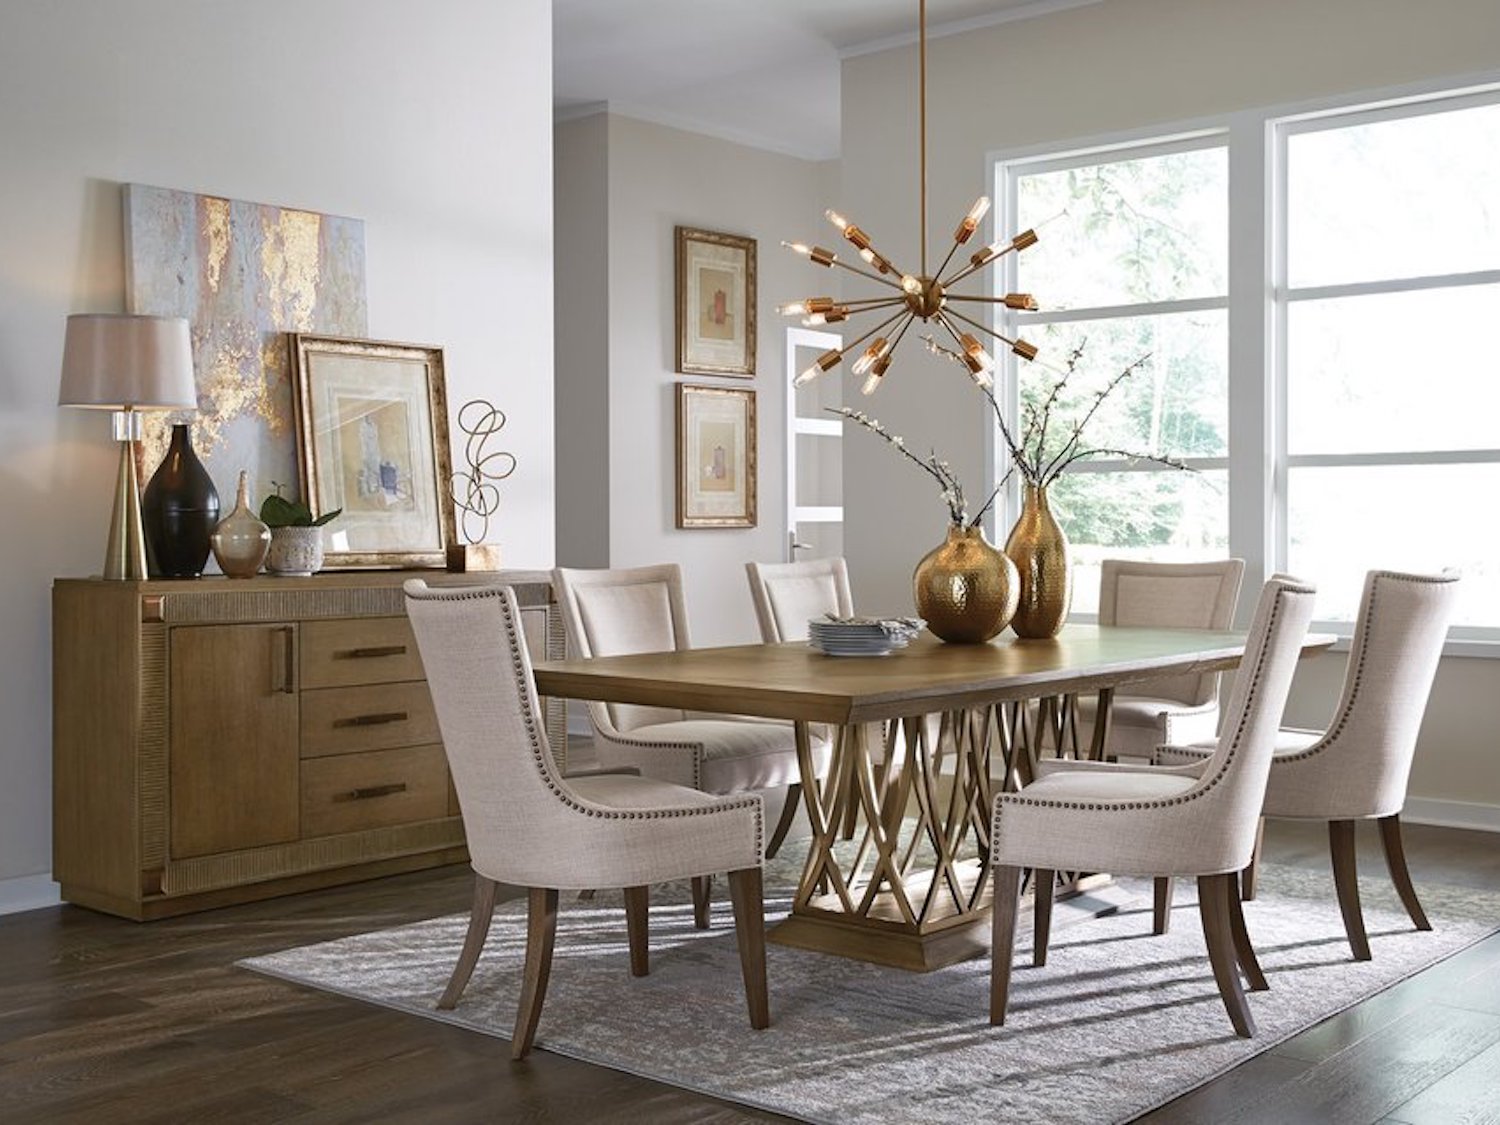 Modern Park Avenue 7 PC Dining Room Set With Metal Accents